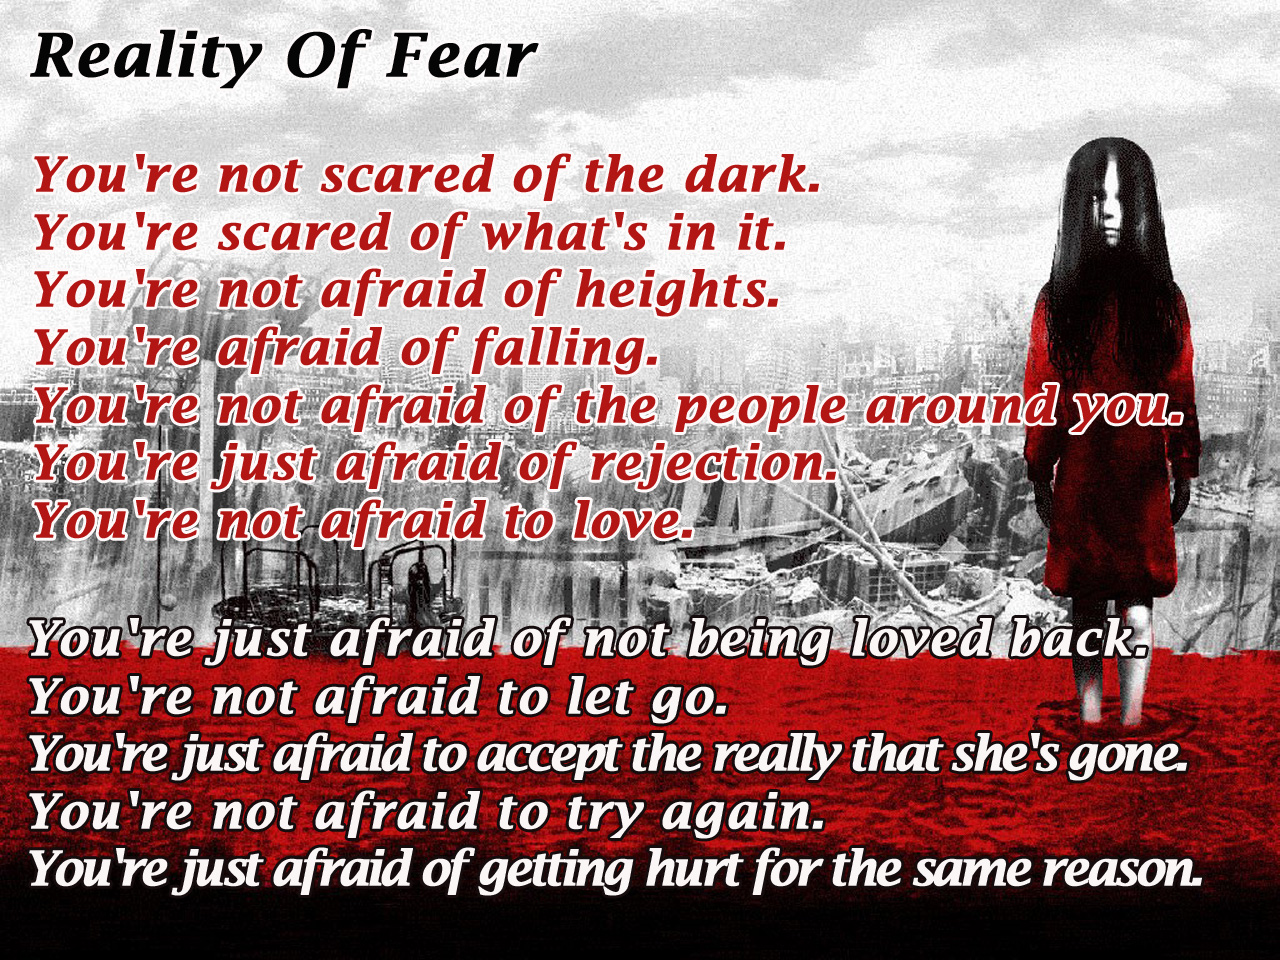 You re scared. Frightened of scared of afraid of. What are you scared of. Afraid of heights. You scared?.